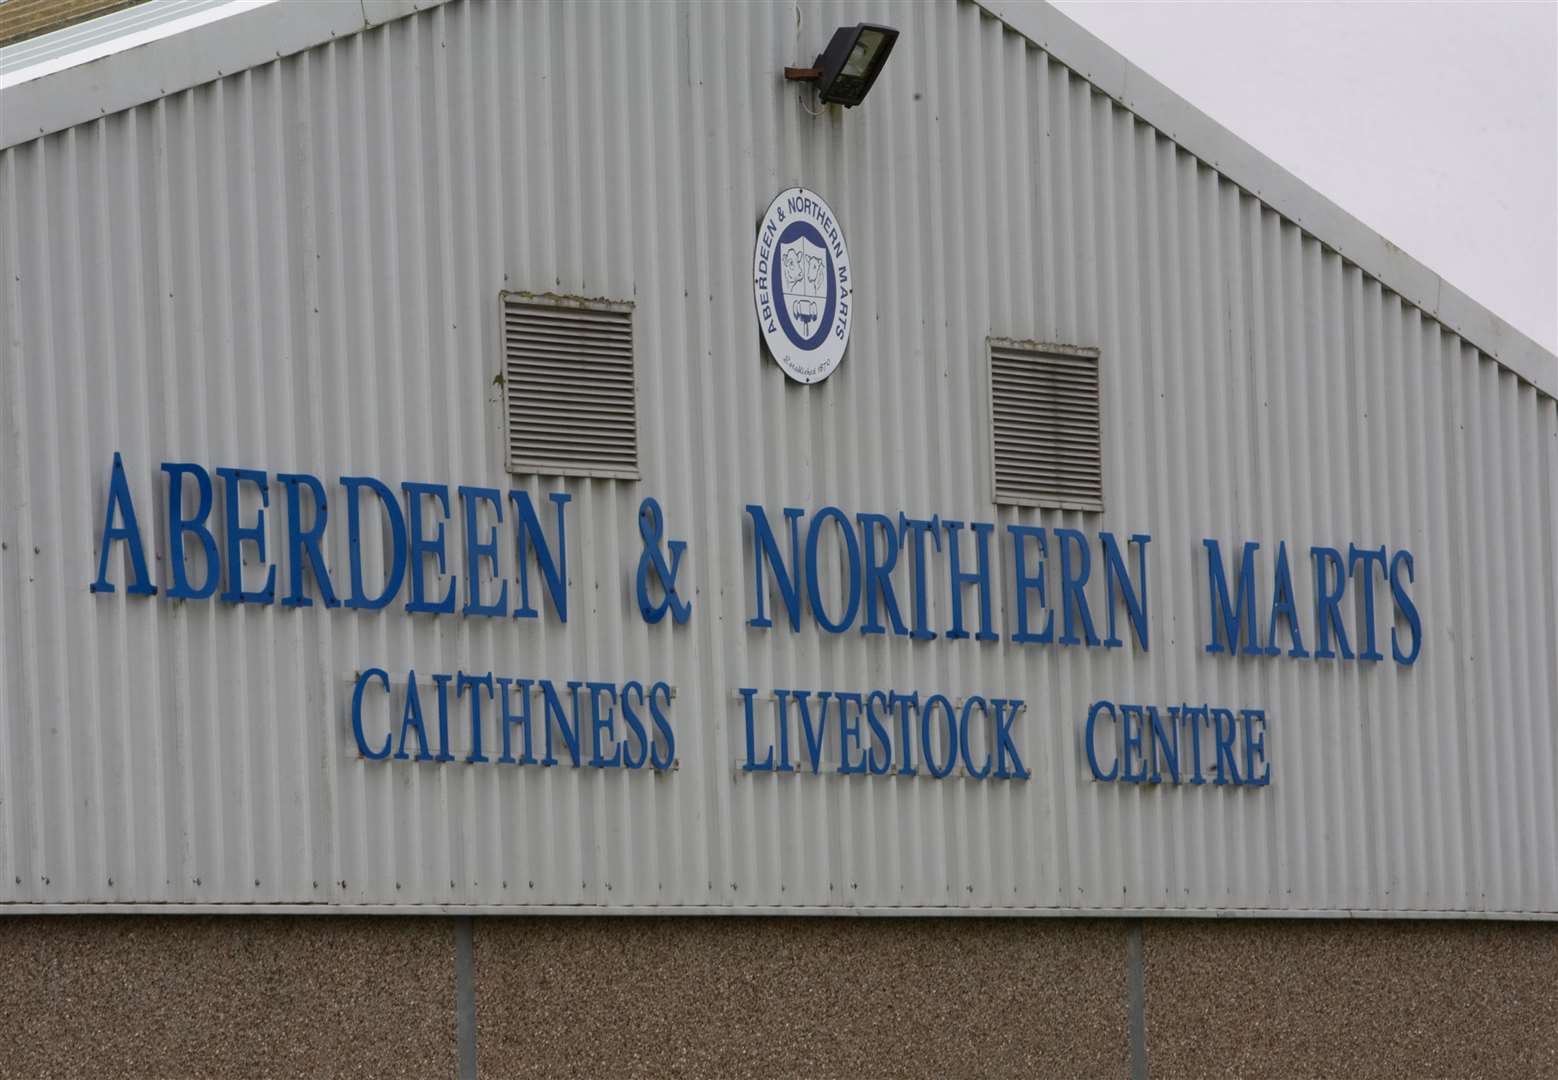 The Caithness Livestock Centre at Quoybrae.